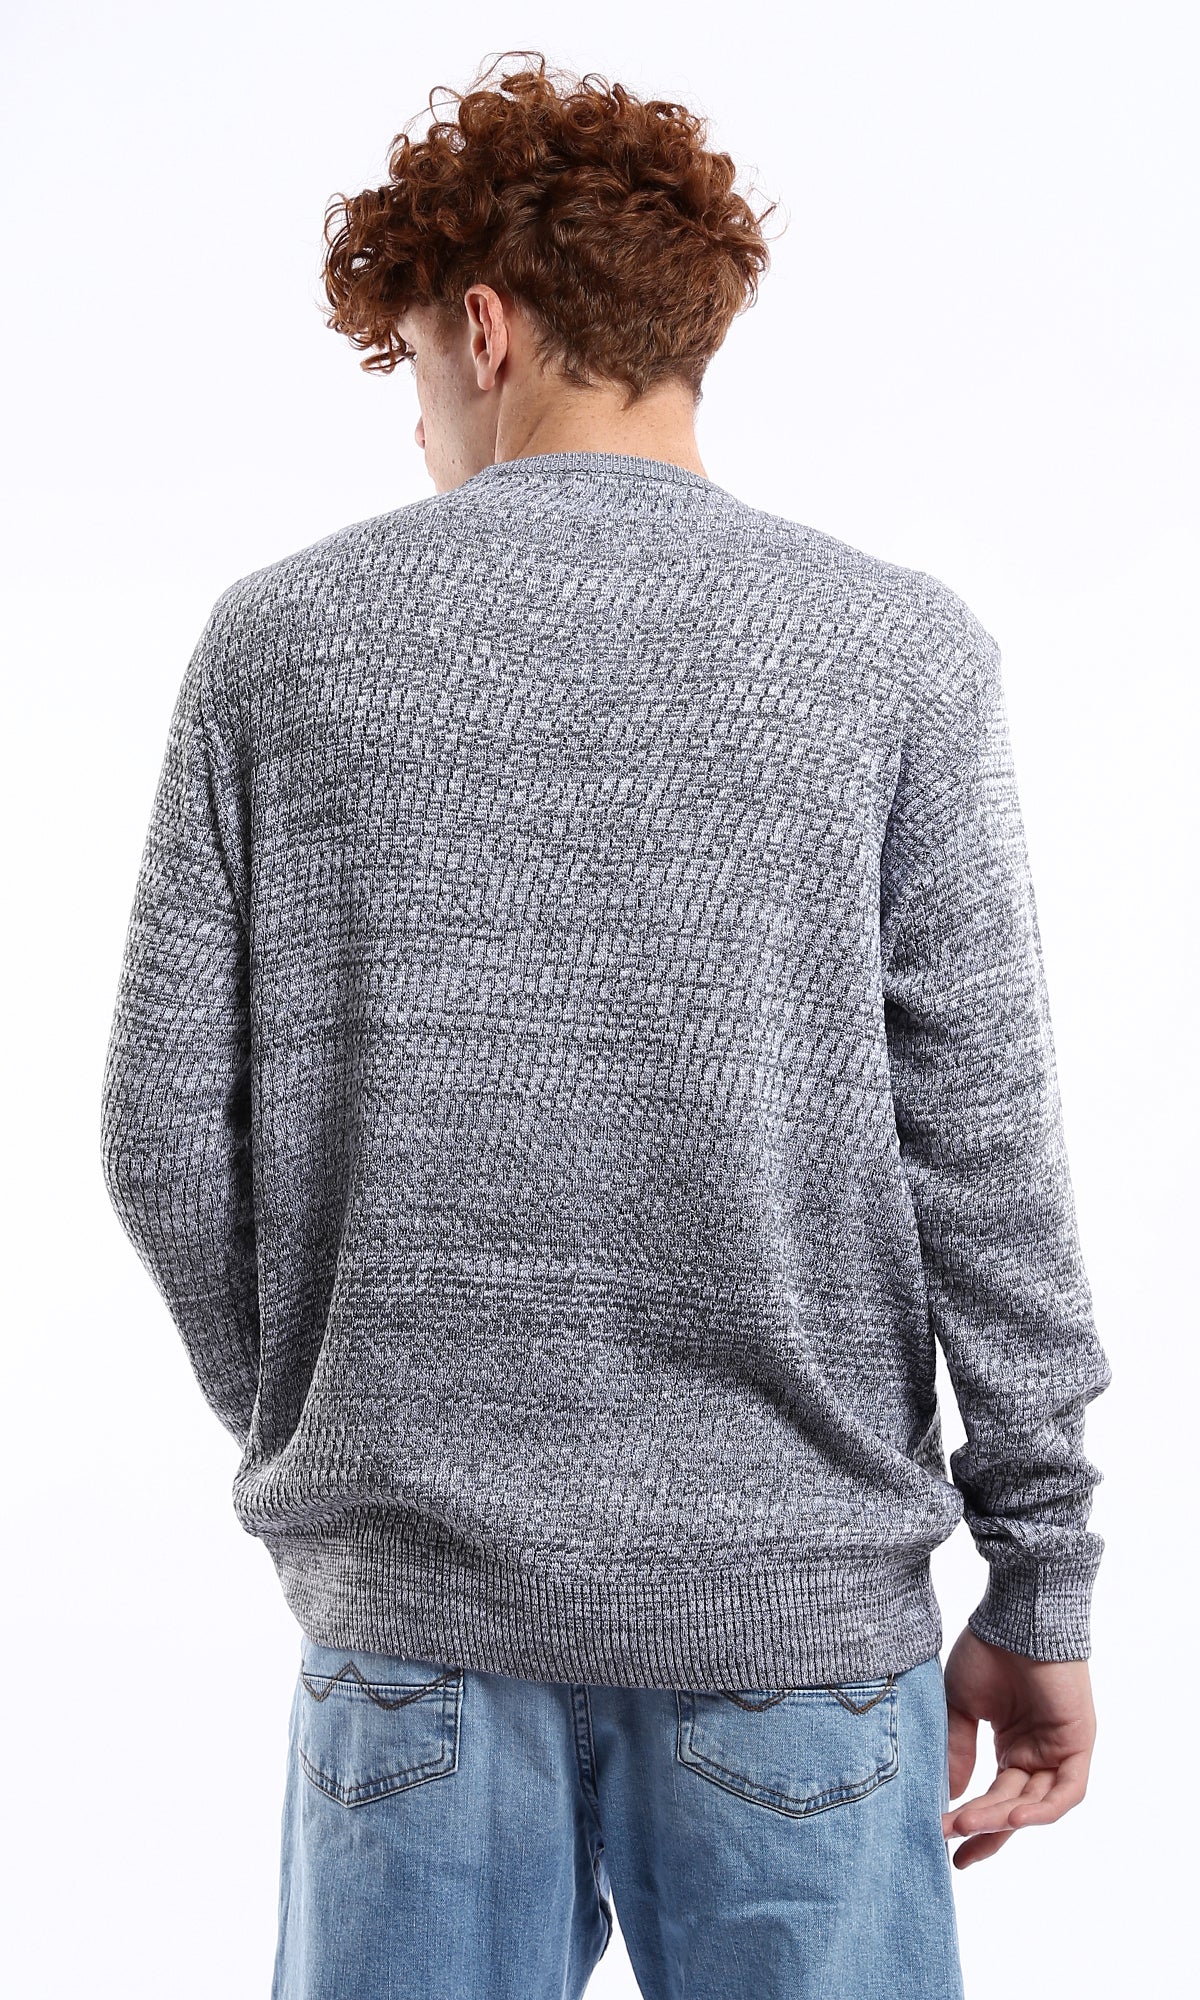 O175246 Round Neck Knitted Grey & White Pullover